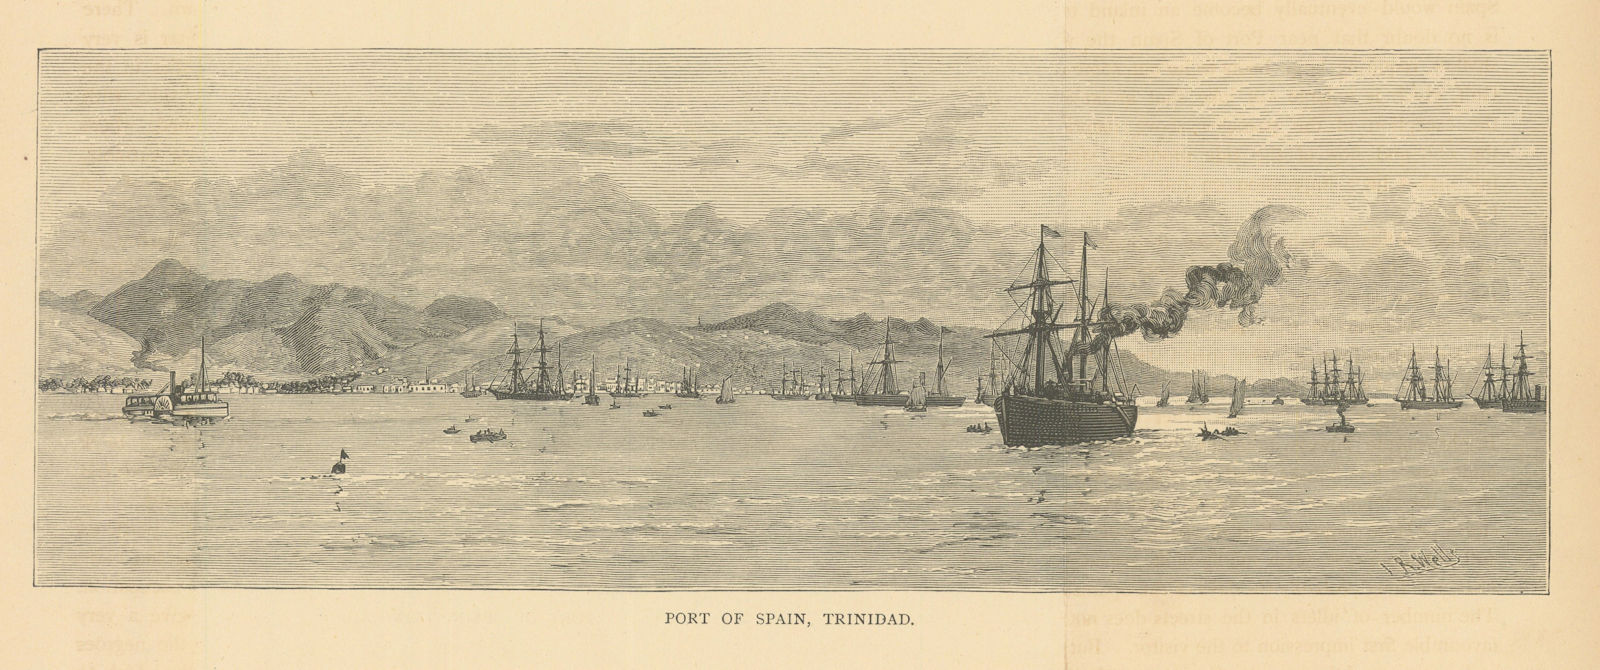 Panorama of Port of Spain, Trinidad, from the sea 1889 old antique print